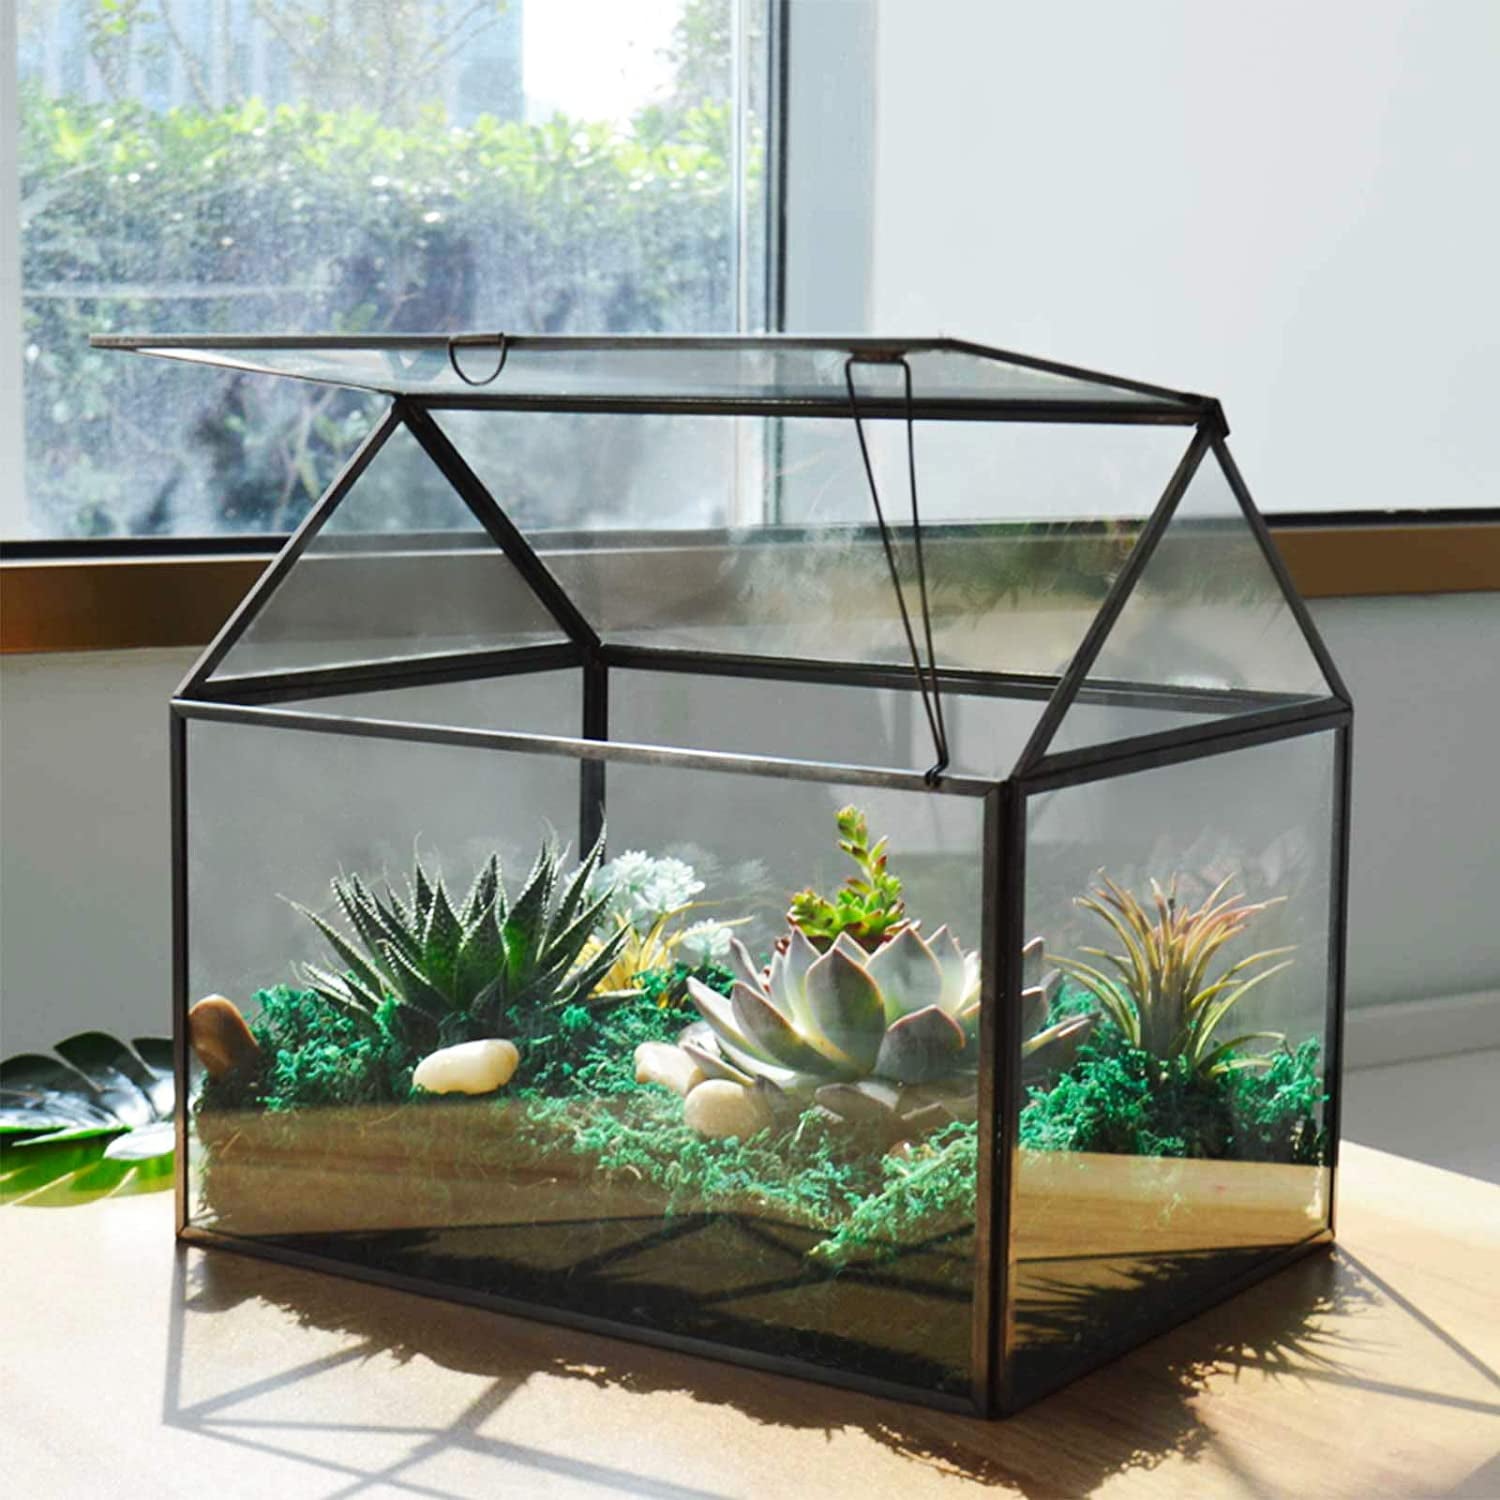 YIMORENCE V, Large Tall Glass Plant Terrarium – House Succulent Glass Terrarium Kit with Lip and Tray Glass Greenhouse Terrarium for Plant 9.5”X5.7”X11.4”